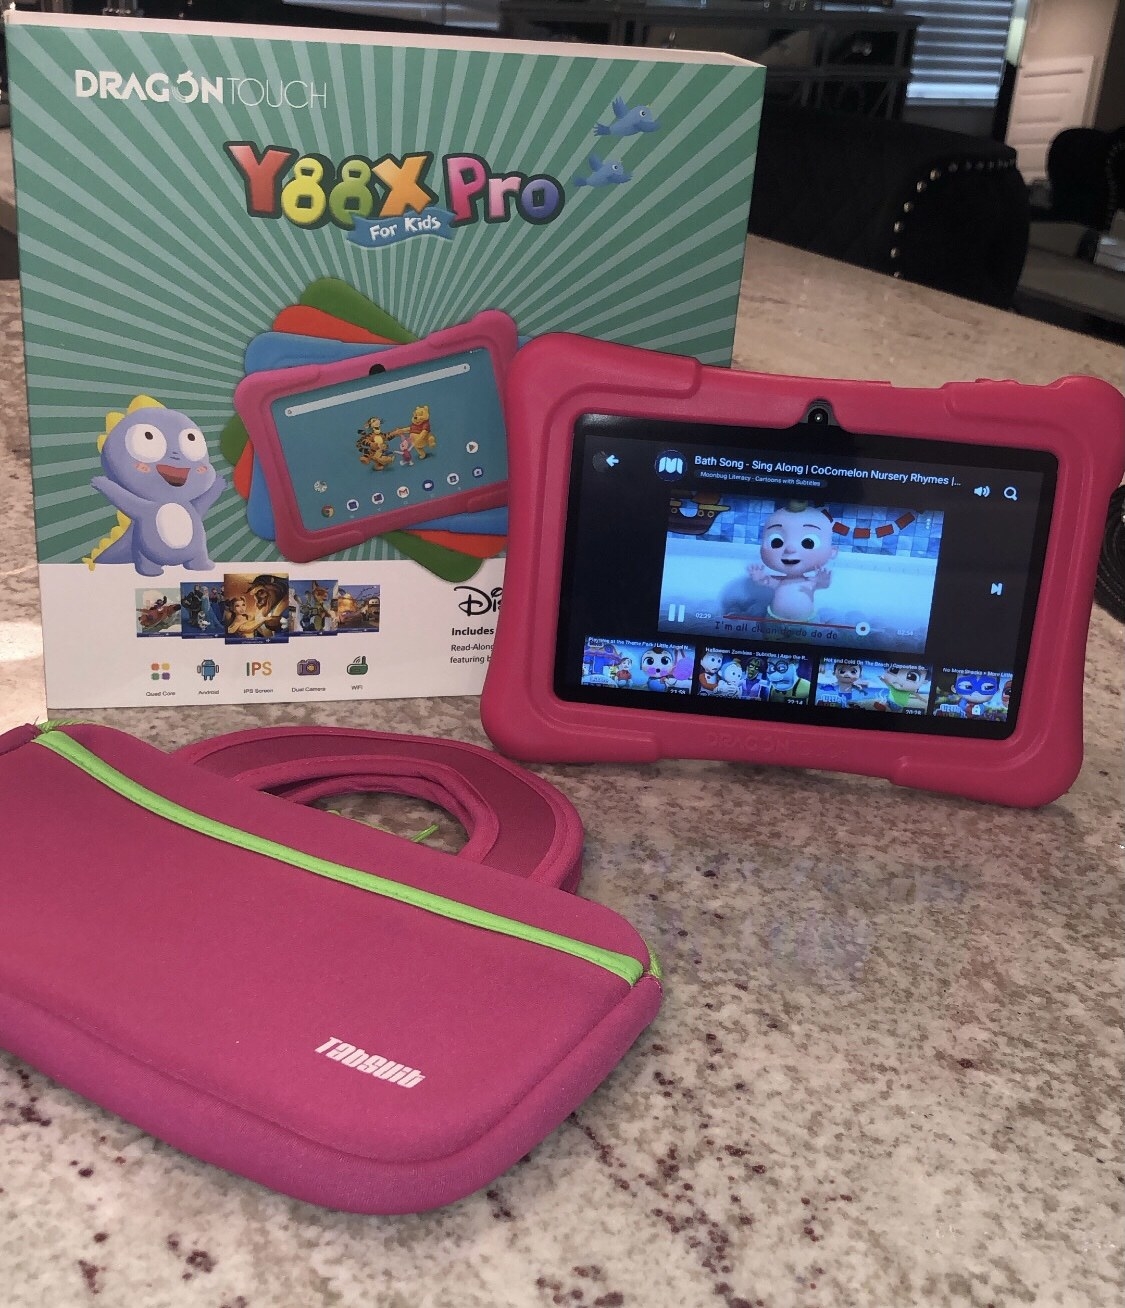 Reviewer photo of pink tablet with video playing next to pink tablet sleeve and product box